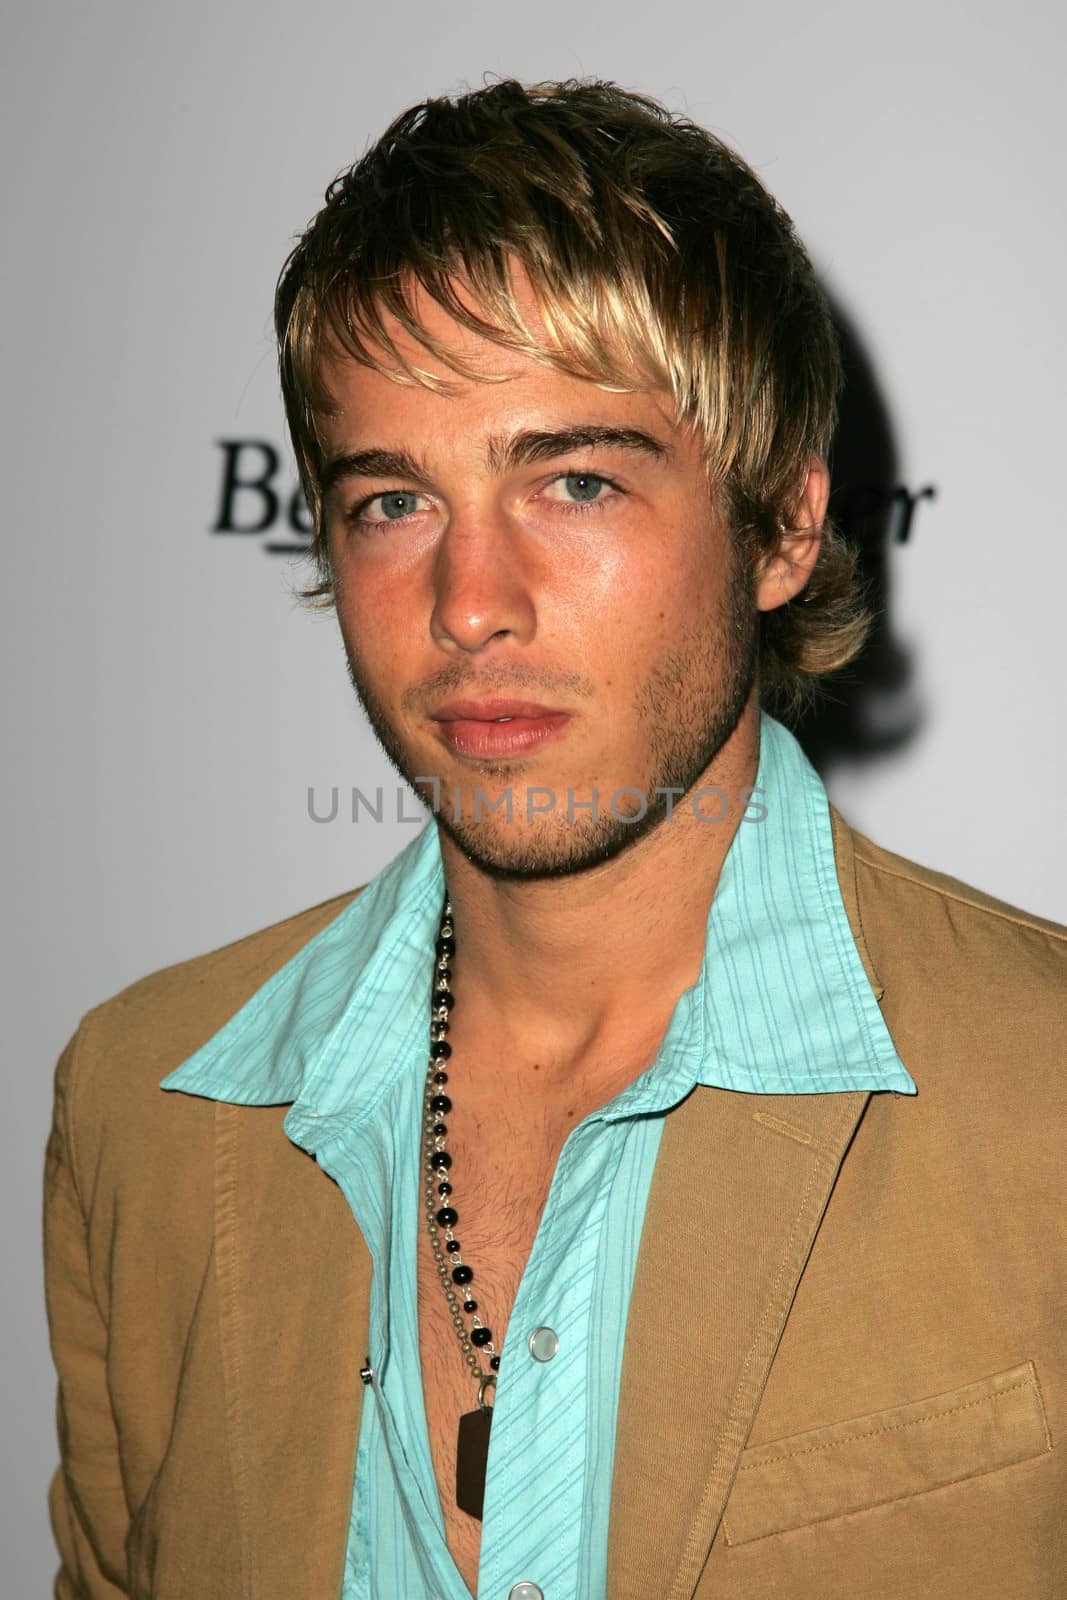 Ryan Carnes at Bench Warmer's 2nd Annual 4th of July Celebration, The Day After, Hollywood, CA 06-29-05